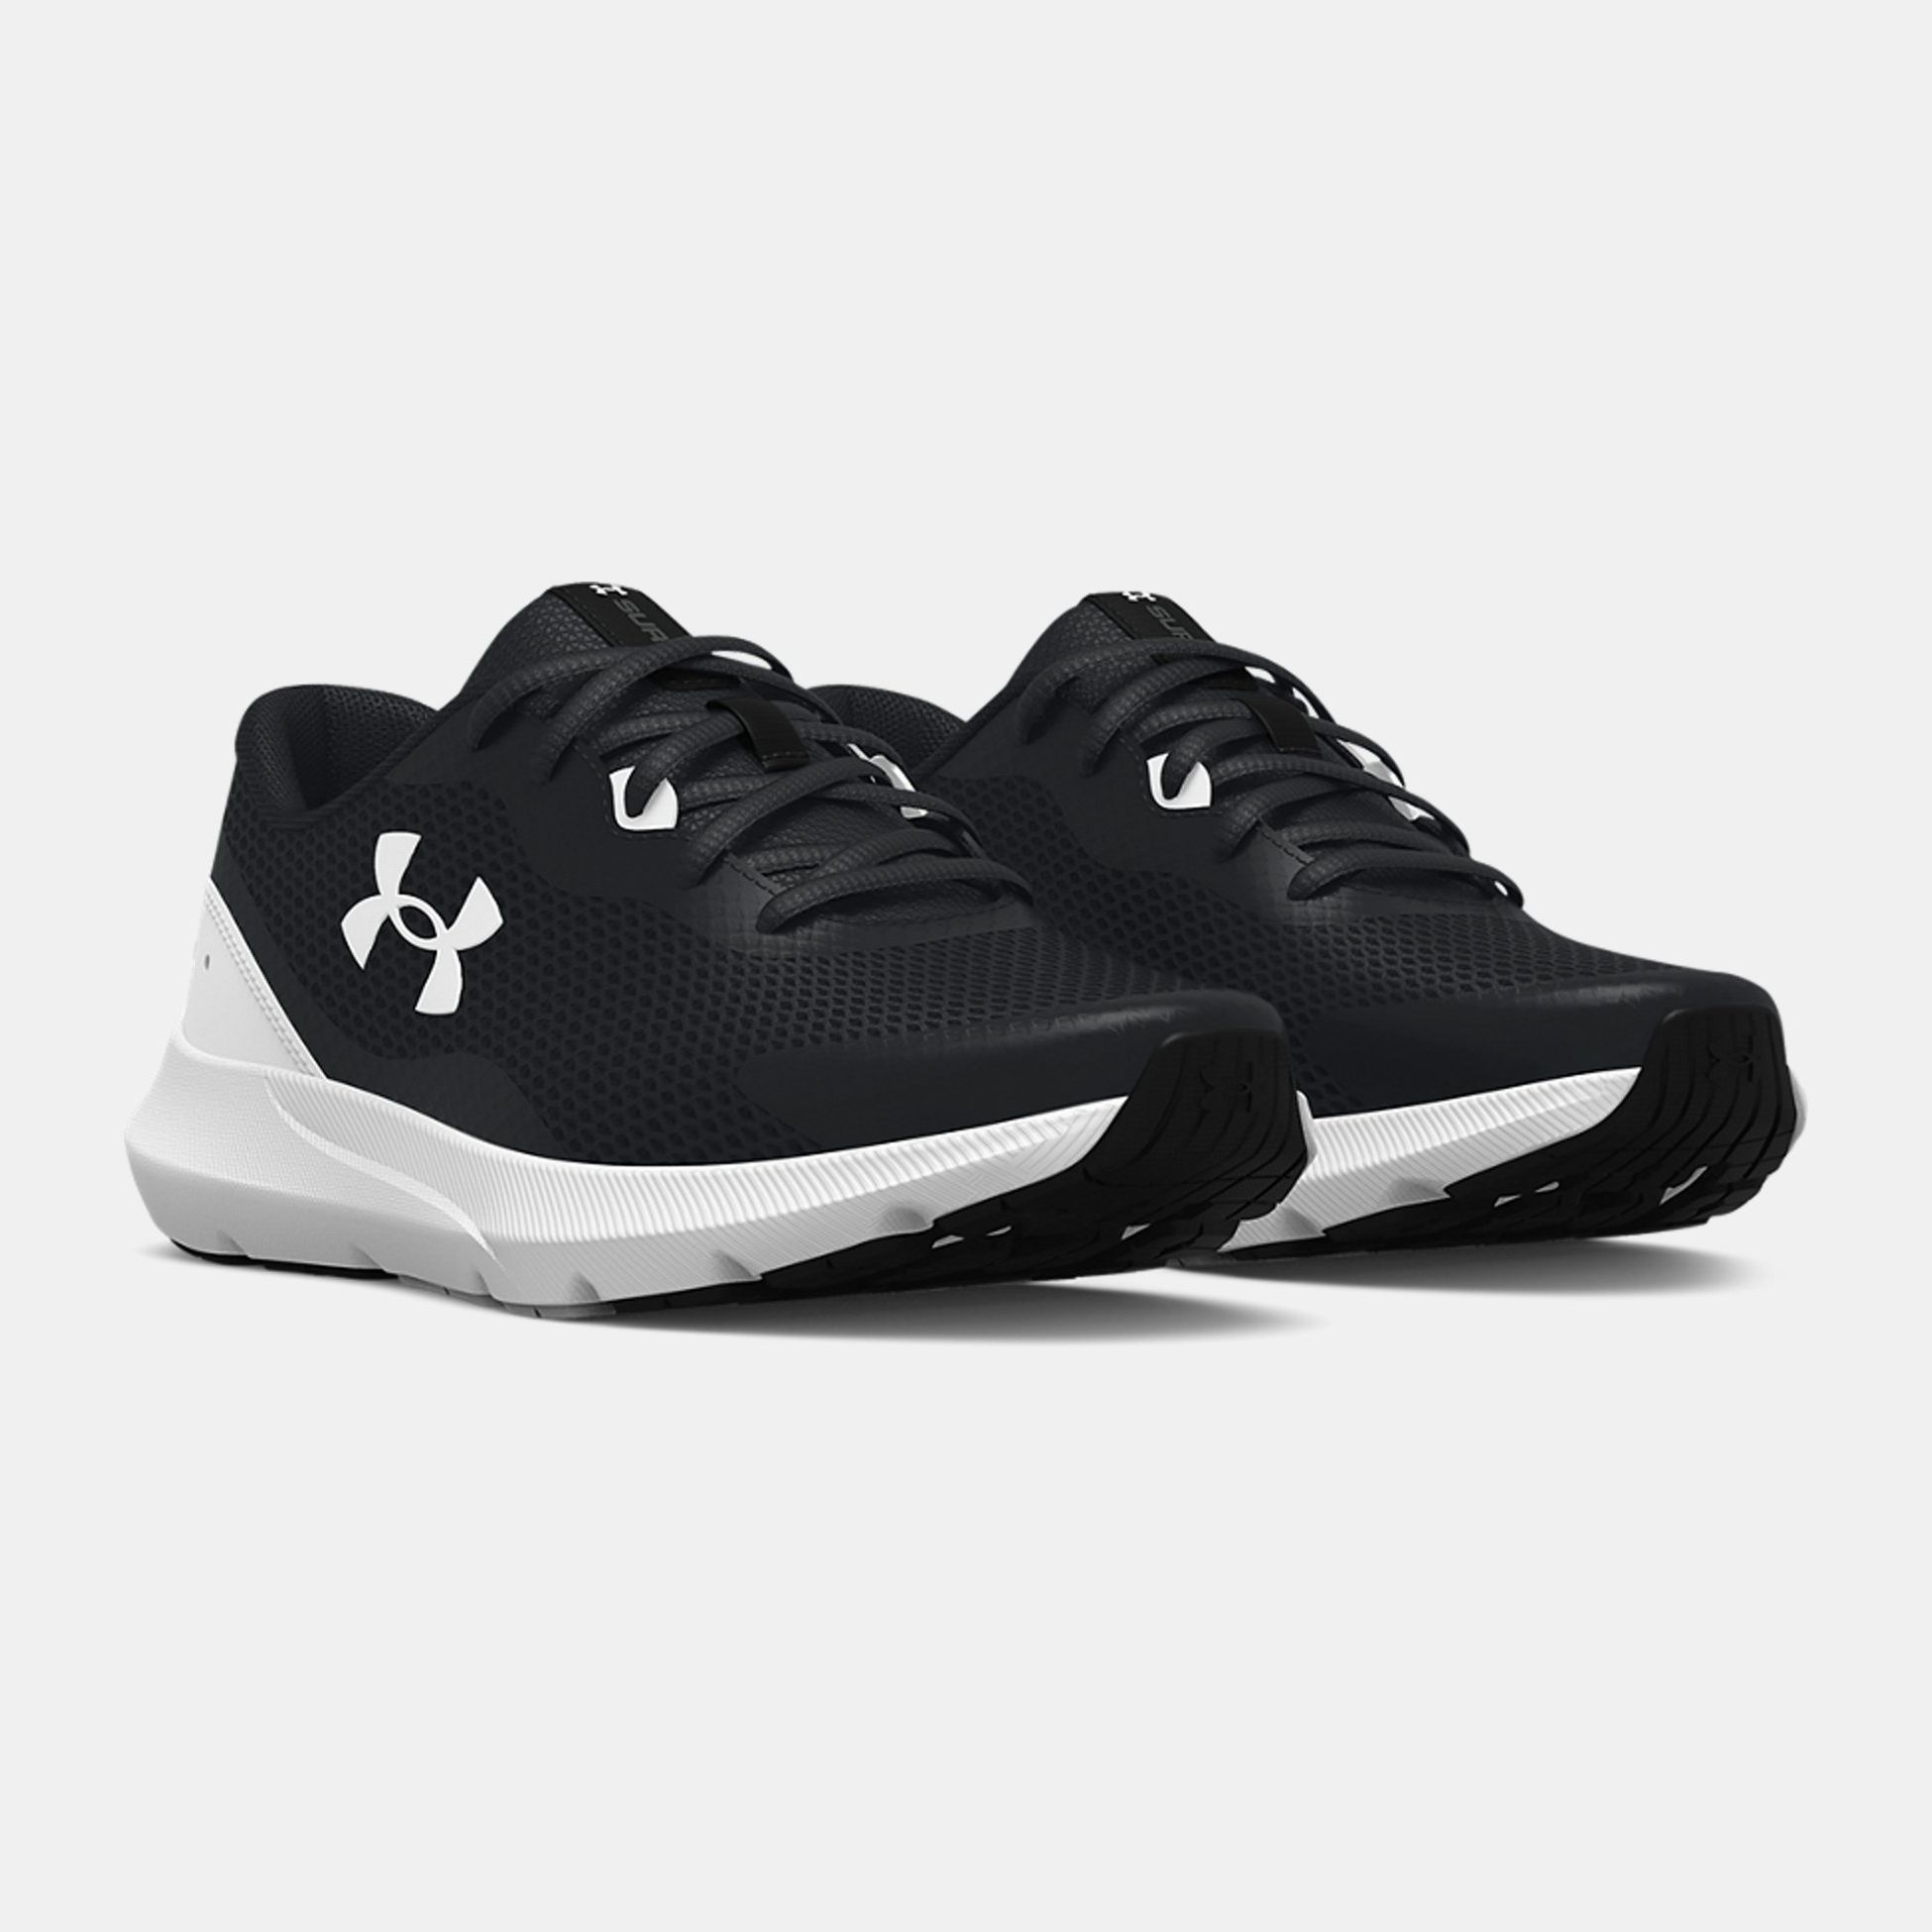 Running Shoes -  under armour UA Surge 3 Running Shoes